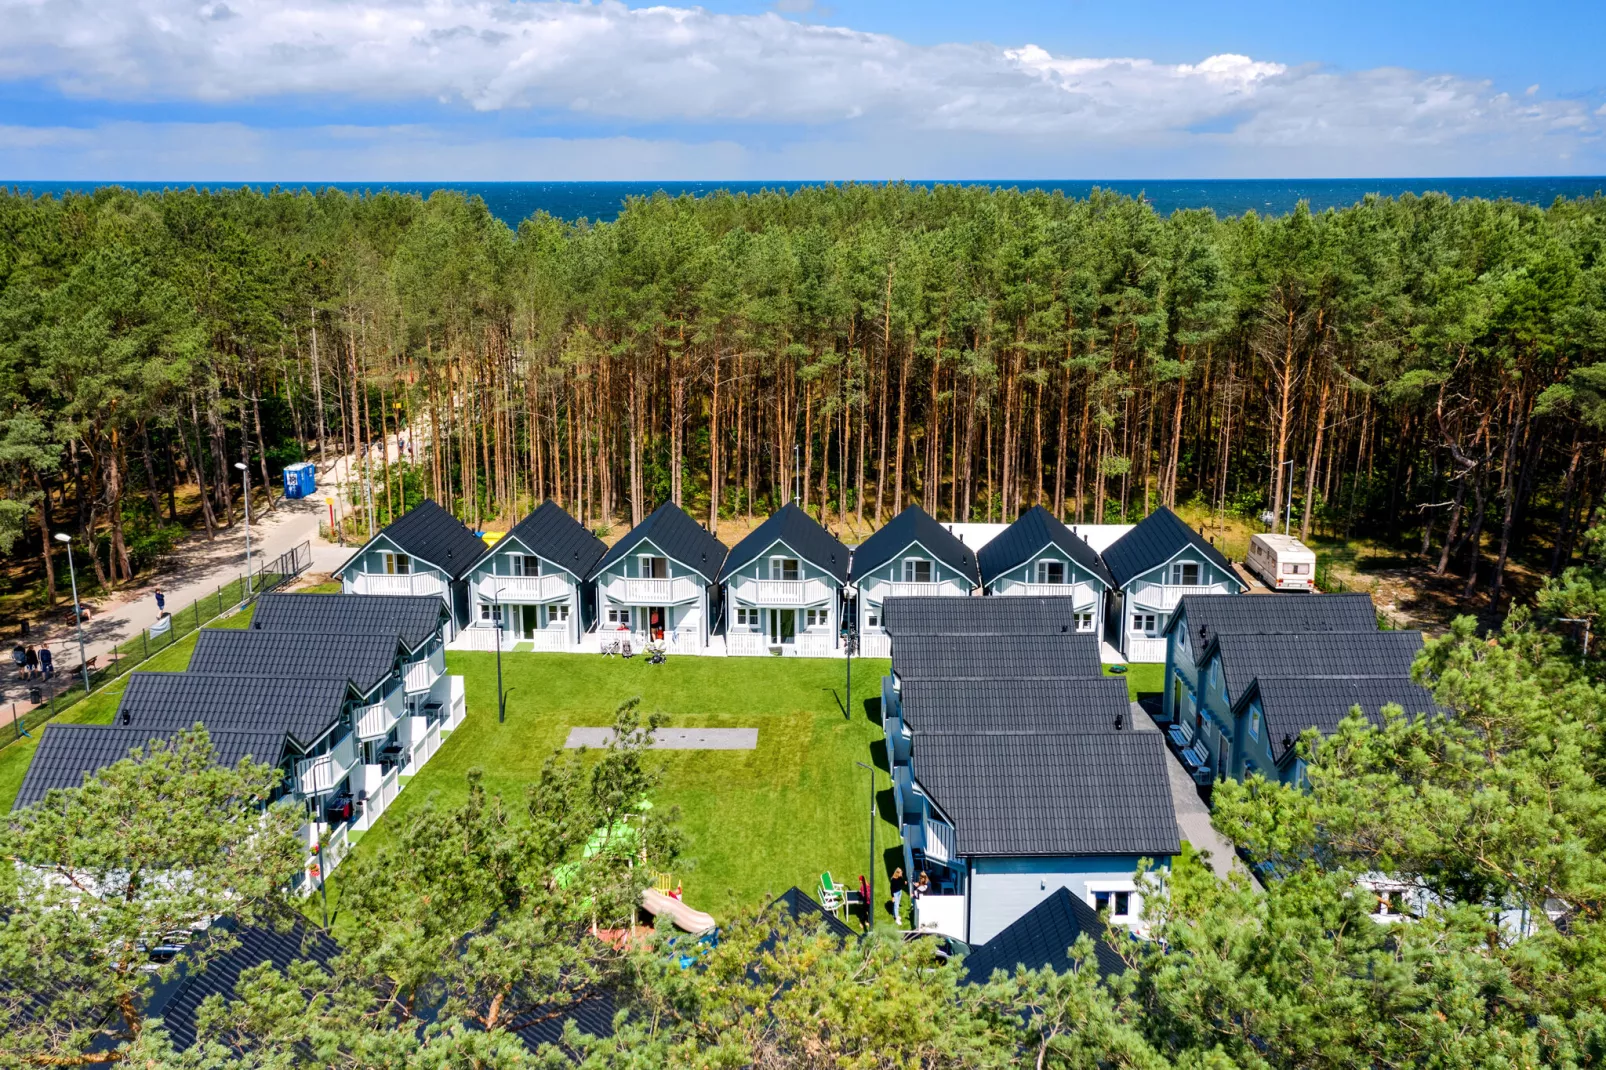 Diune Resort at the seashore in Miedzywodzie for 7 persons NIEW-Image-tags.